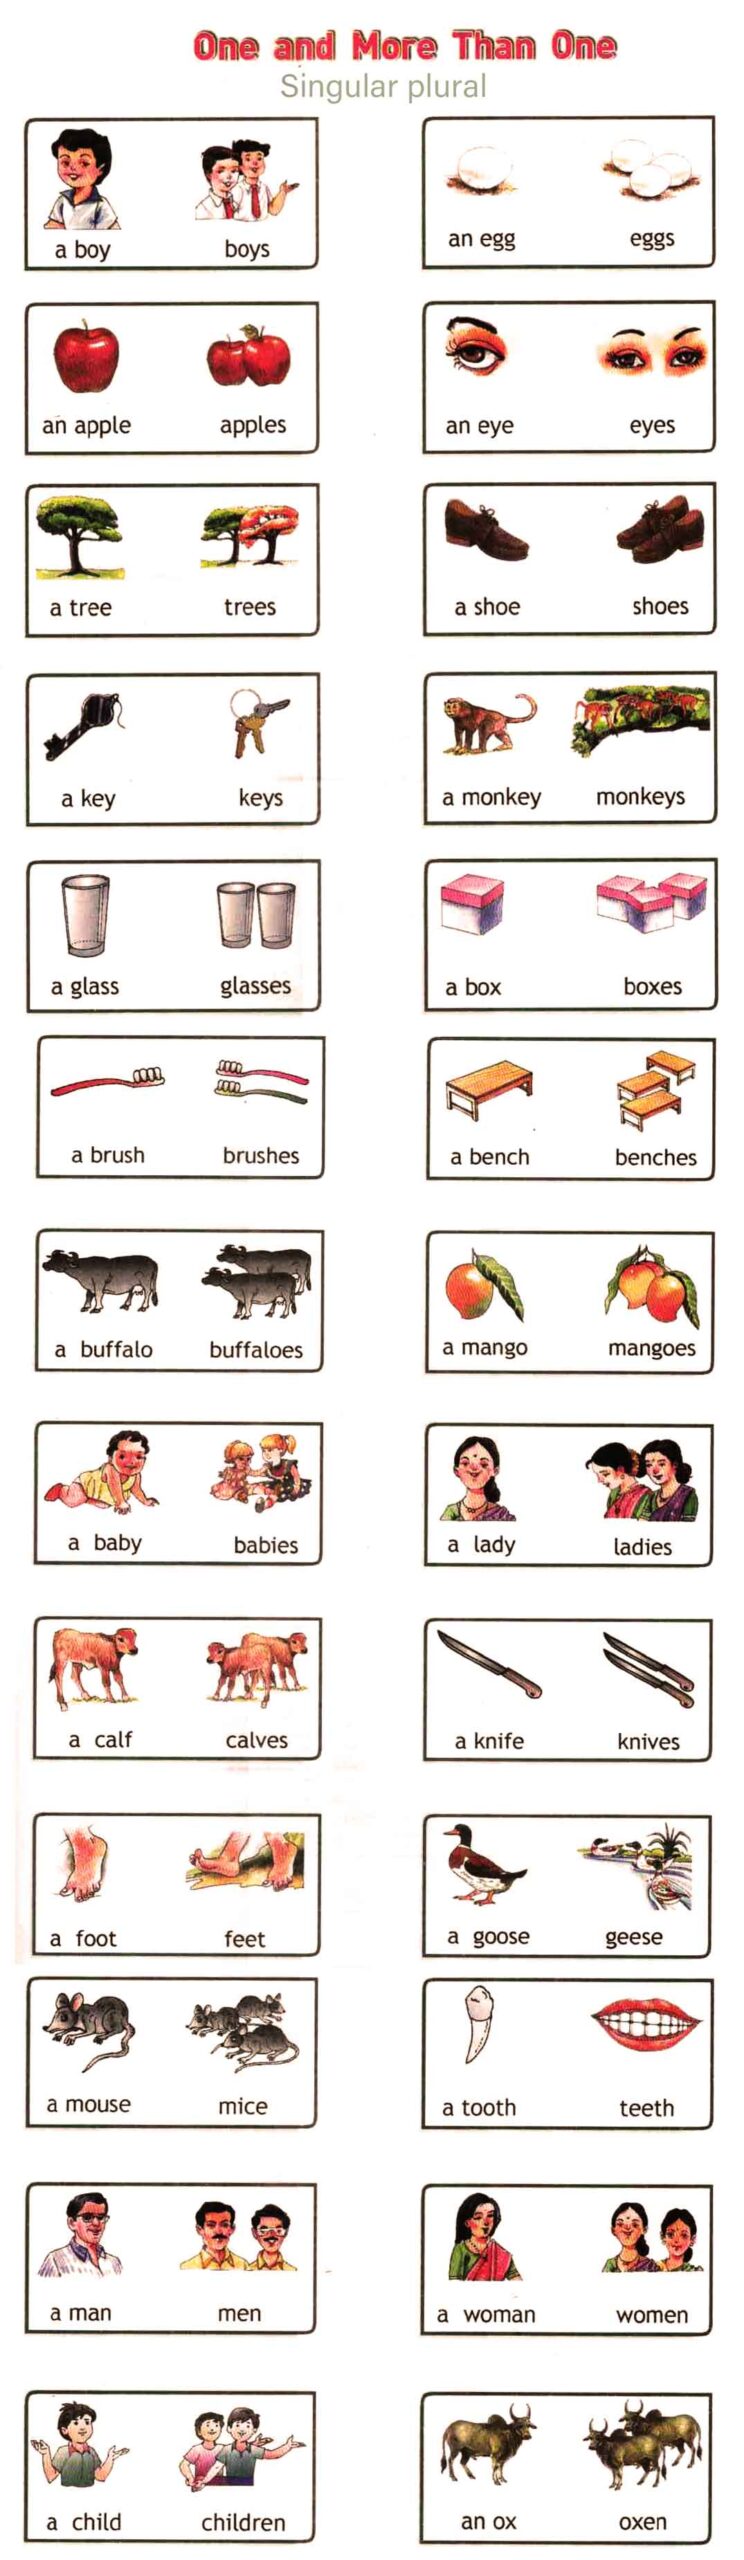 Singular Plural Words With Pictures